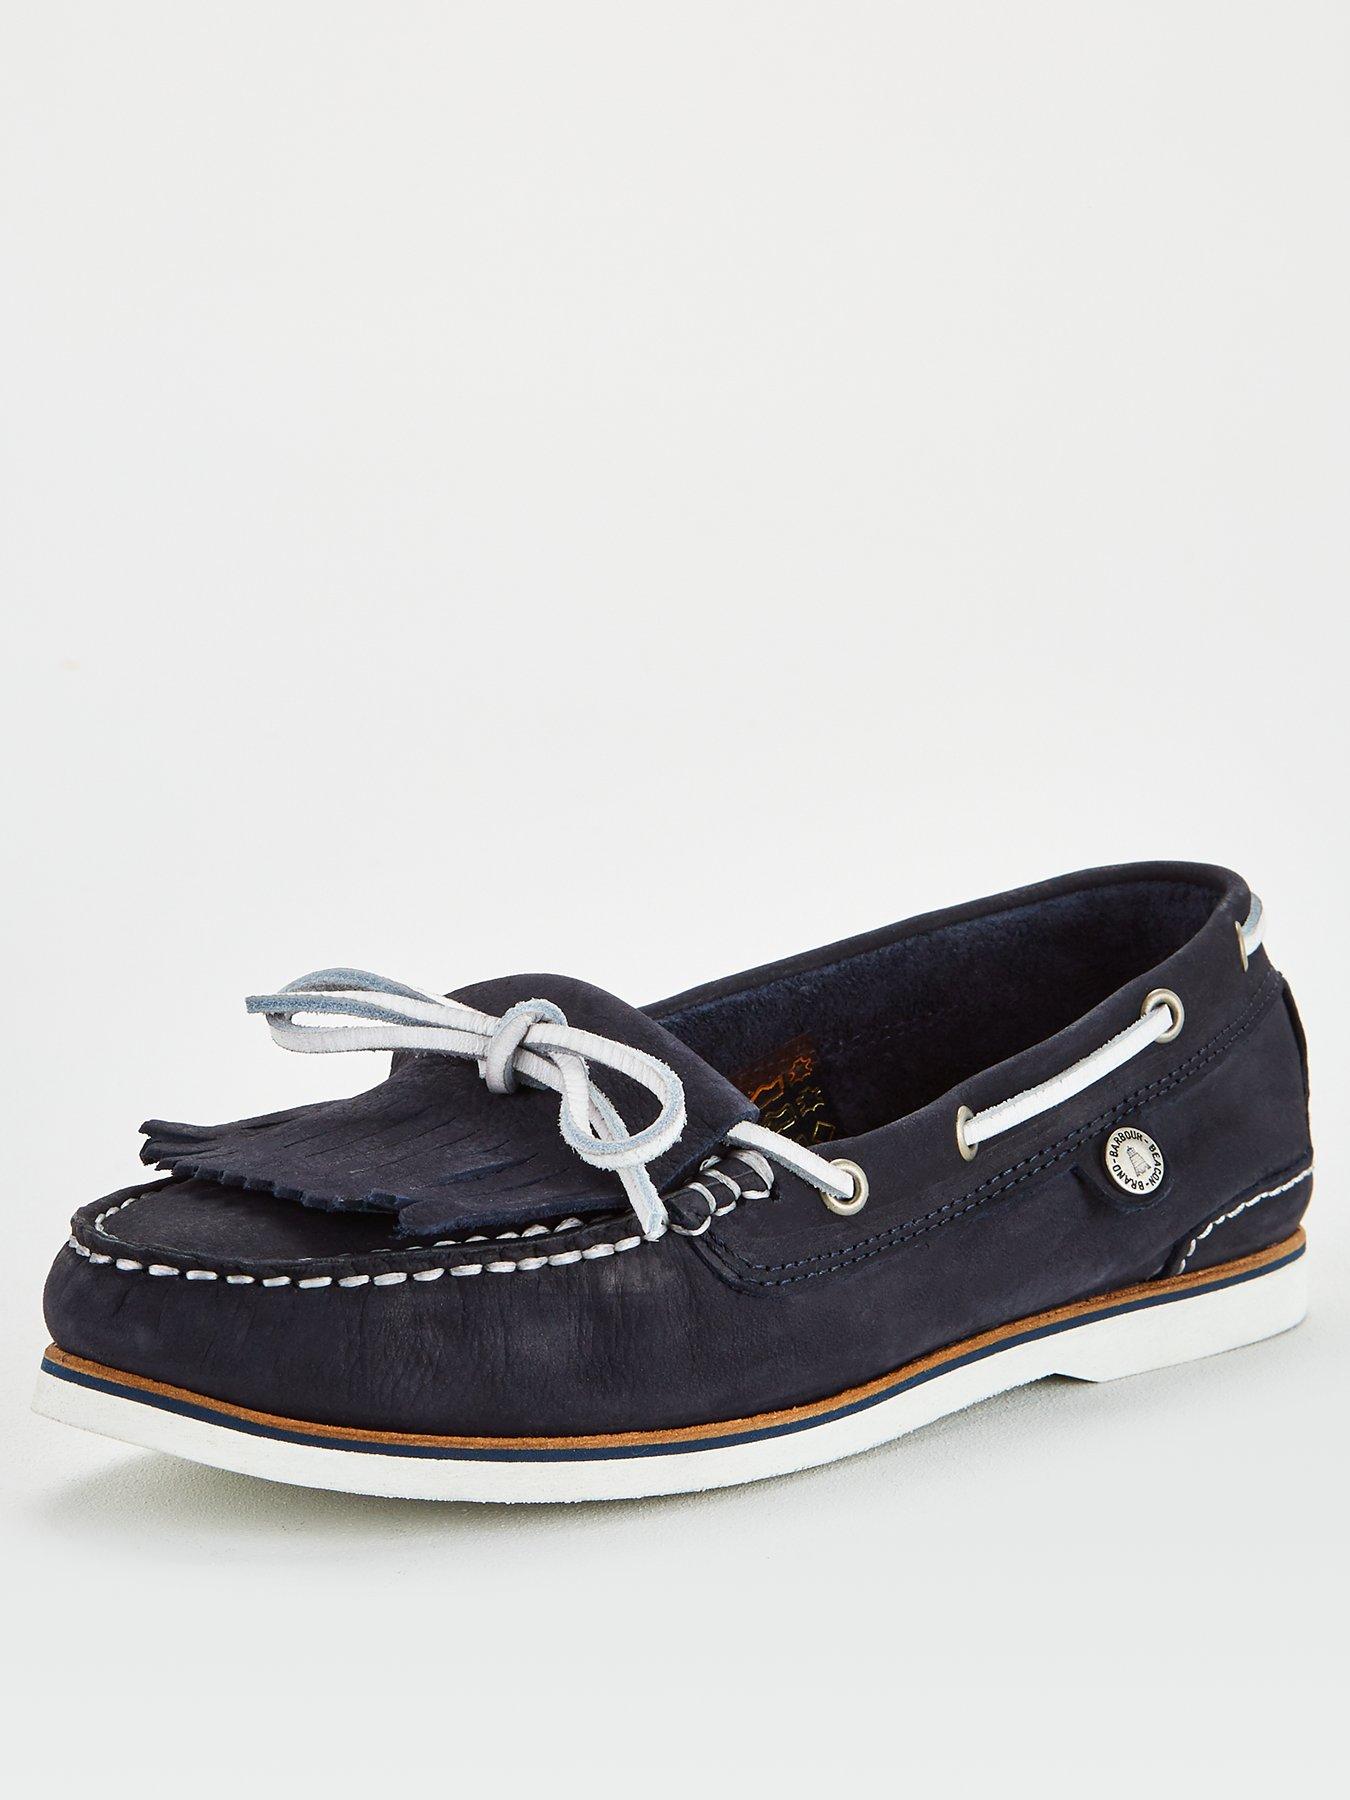 womens barbour boat shoes